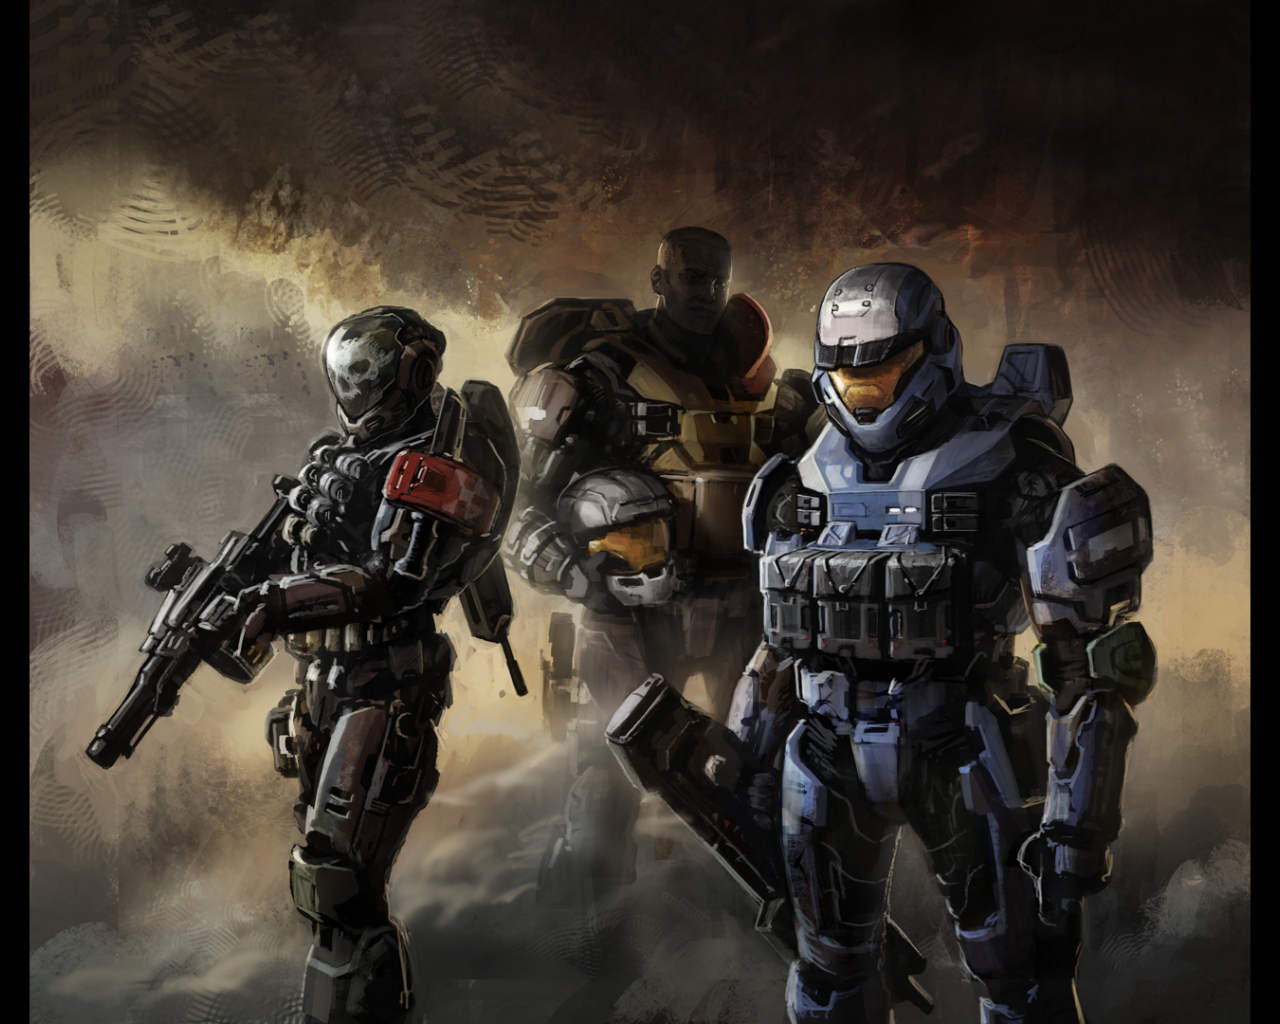 Free download Noble Team [wide] [1920x1080] for your Desktop, Mobile & Tablet. Explore Halo Reach Background. Halo Reach Wallpaper for Desktop, Halo Reach Emile Wallpaper, Halo Slideshow Wallpaper